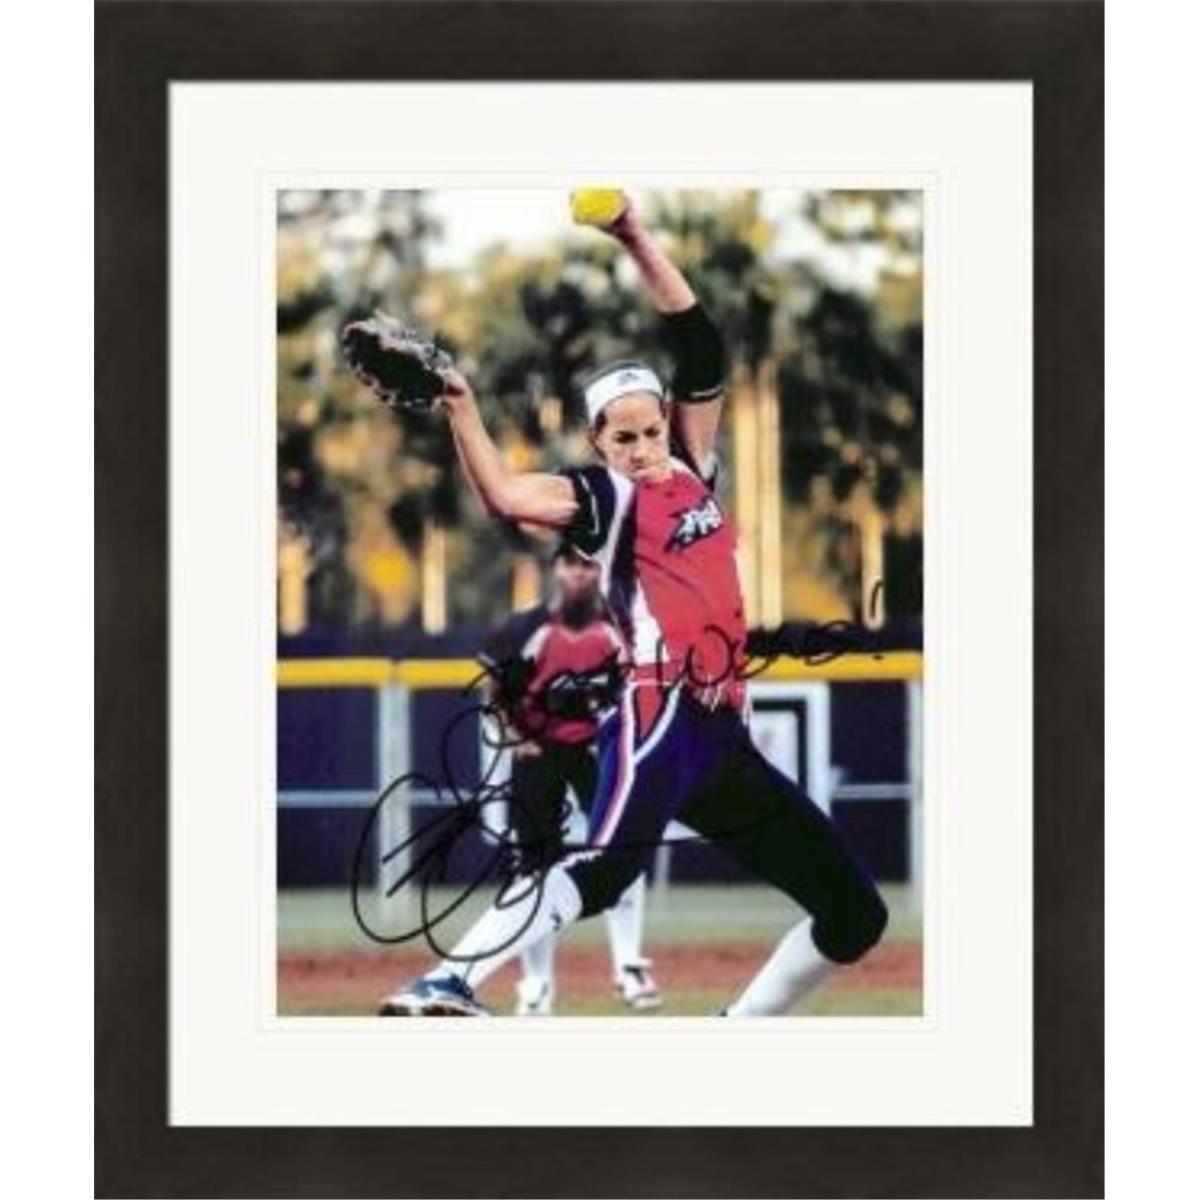 454843 8 x 10 in. Cat Osterman Autographed SC8 Matted & Framed Photo -  Autograph Warehouse